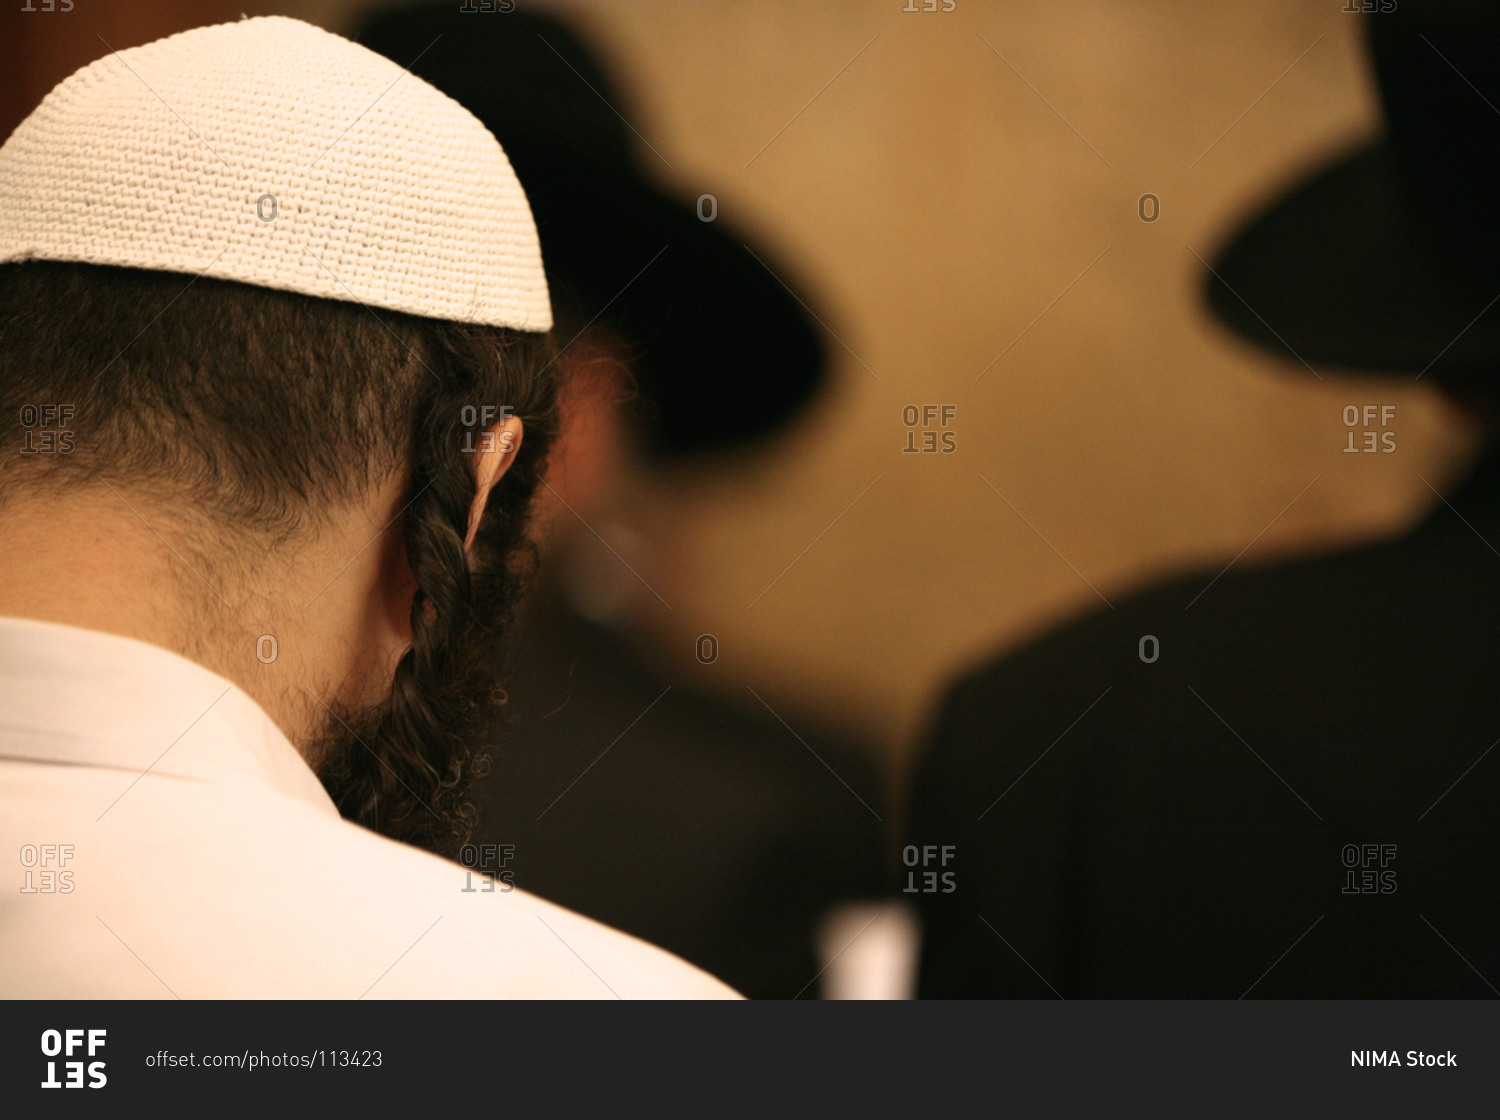 Rear view of a Jewish man with traditional hairstyle wearing a kippah